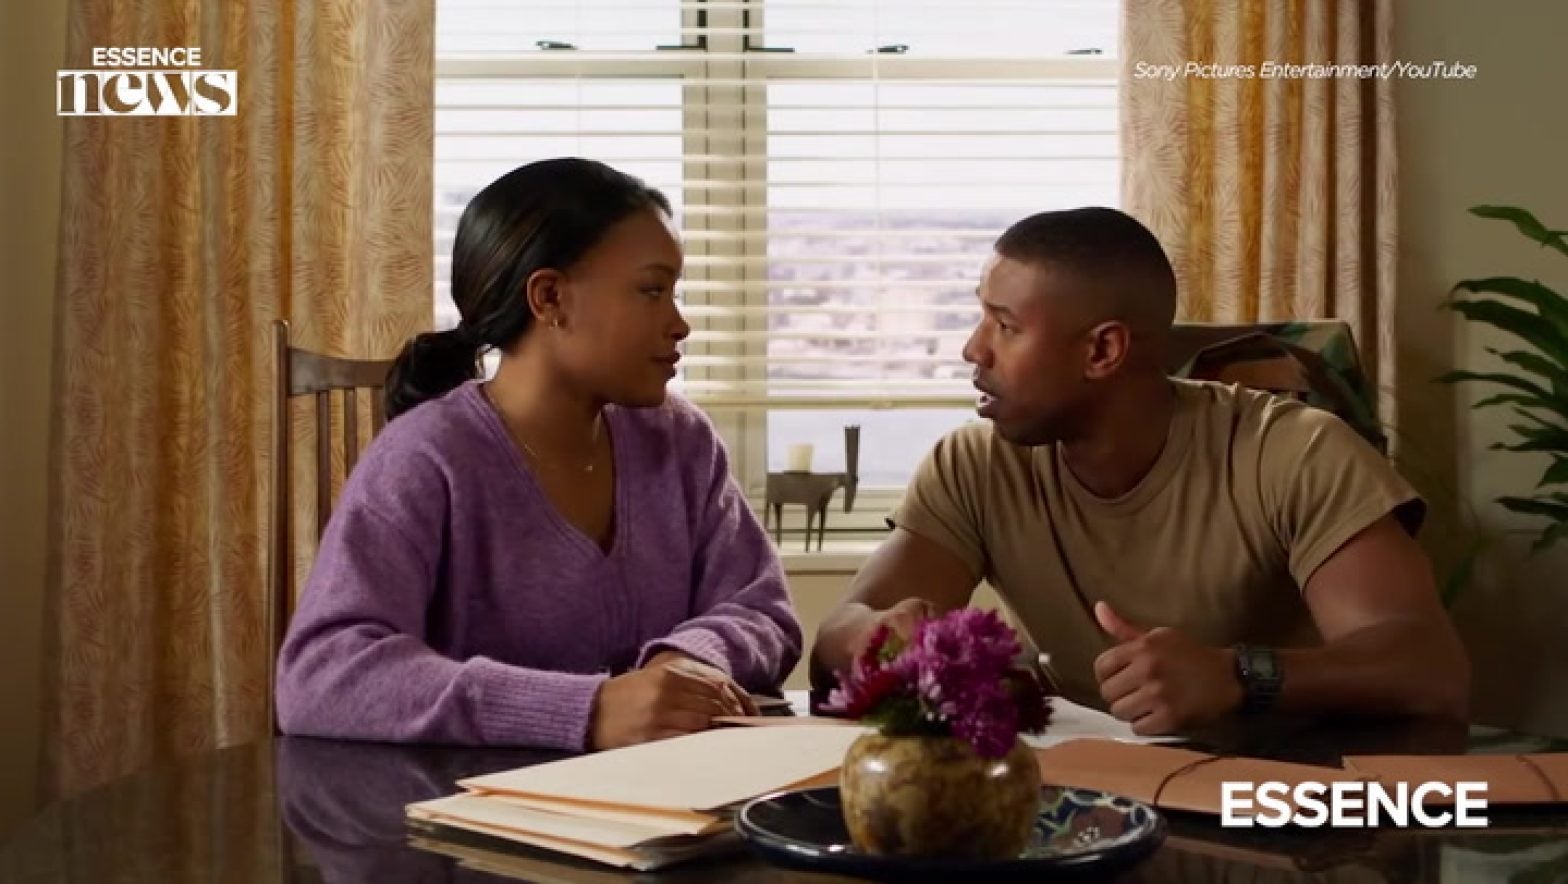 Dana Canedy And Denzel Washington Discuss Emotional And Funny Moments In ‘A Journal For Jordan’